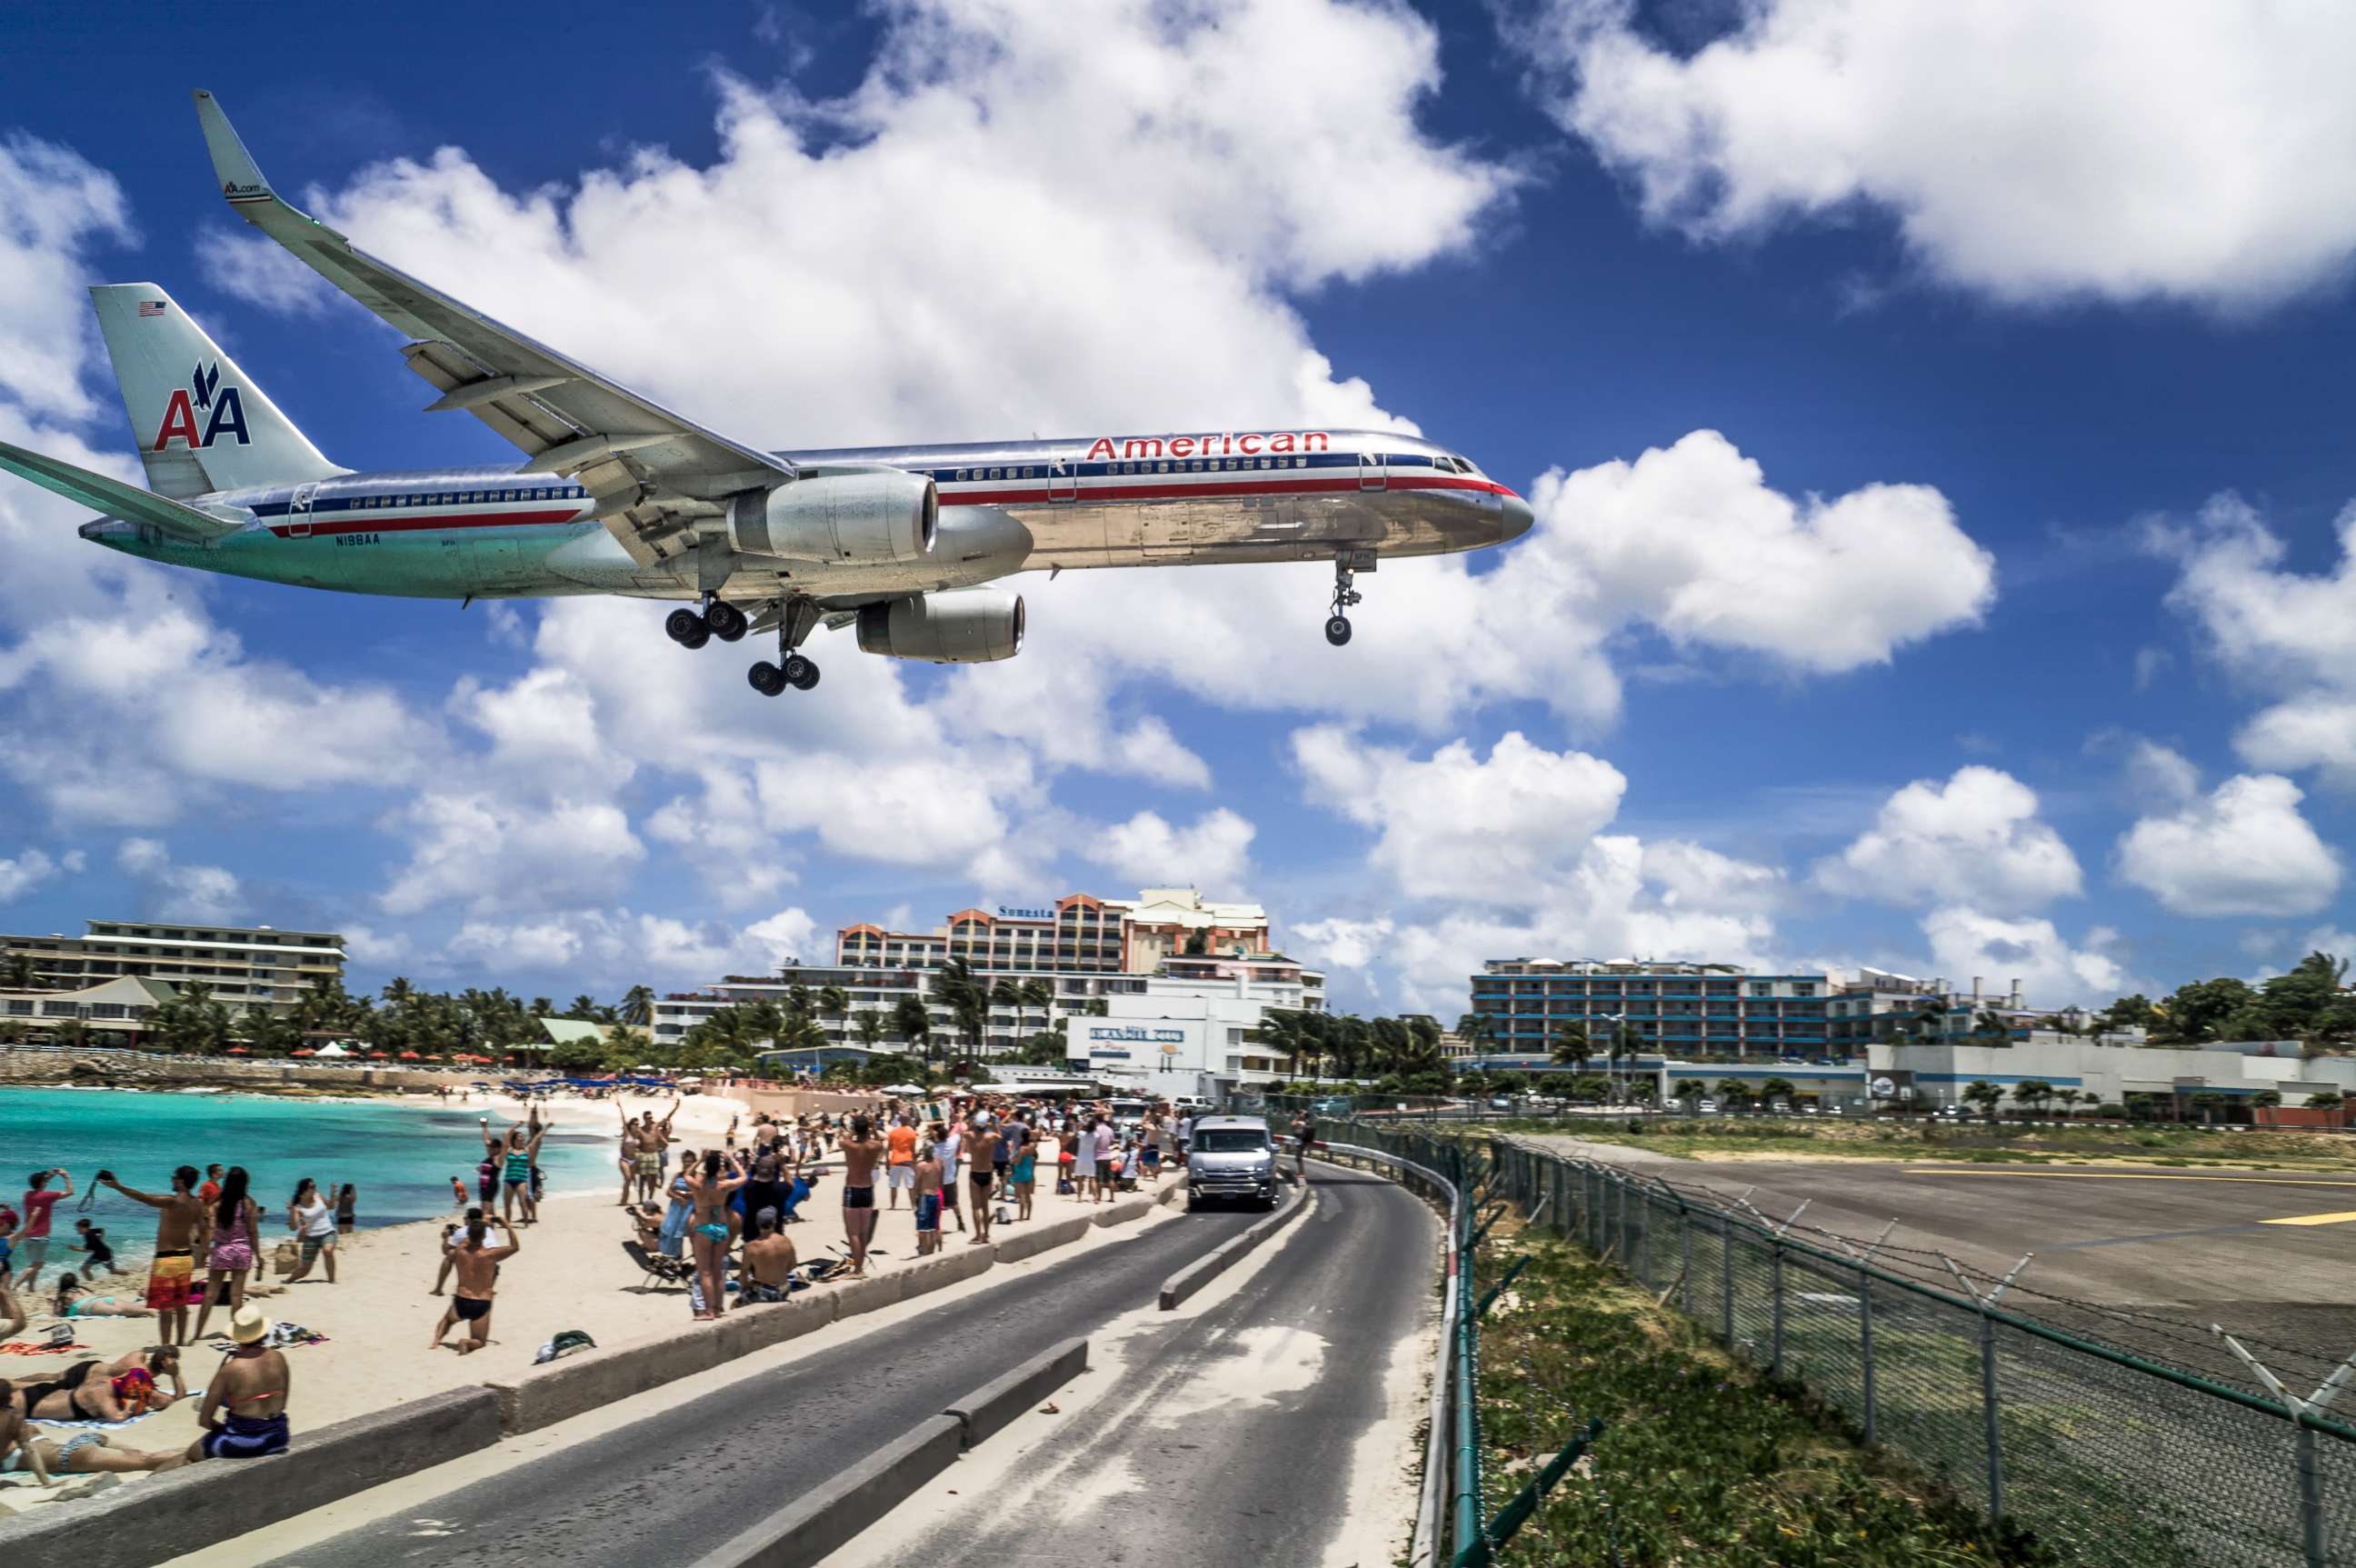 PHOTO: A commercial airline landing at the Princess Juliana International Airport in St Maarten.